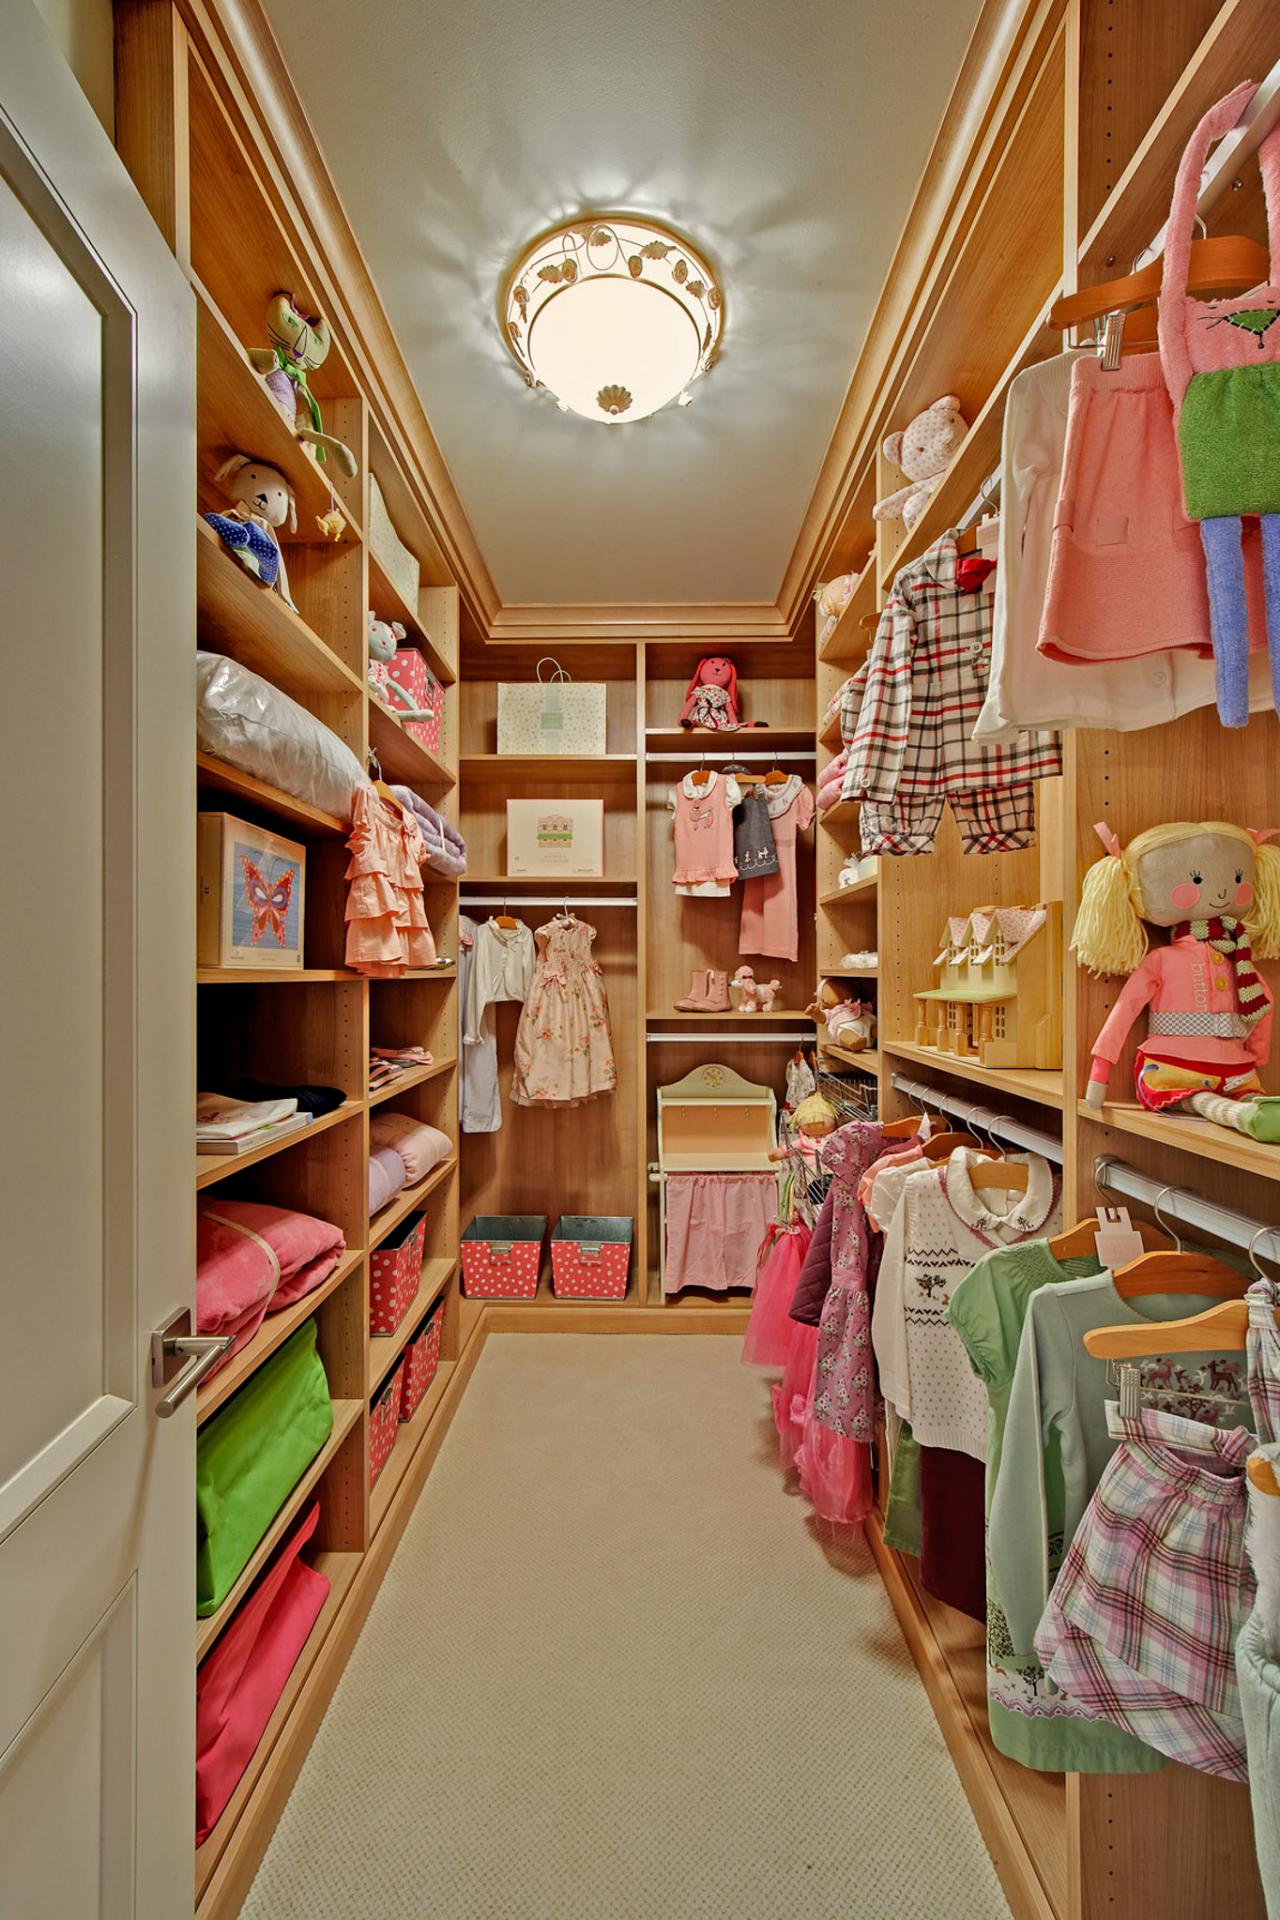 Tips for Creating an Organized Kids Closet